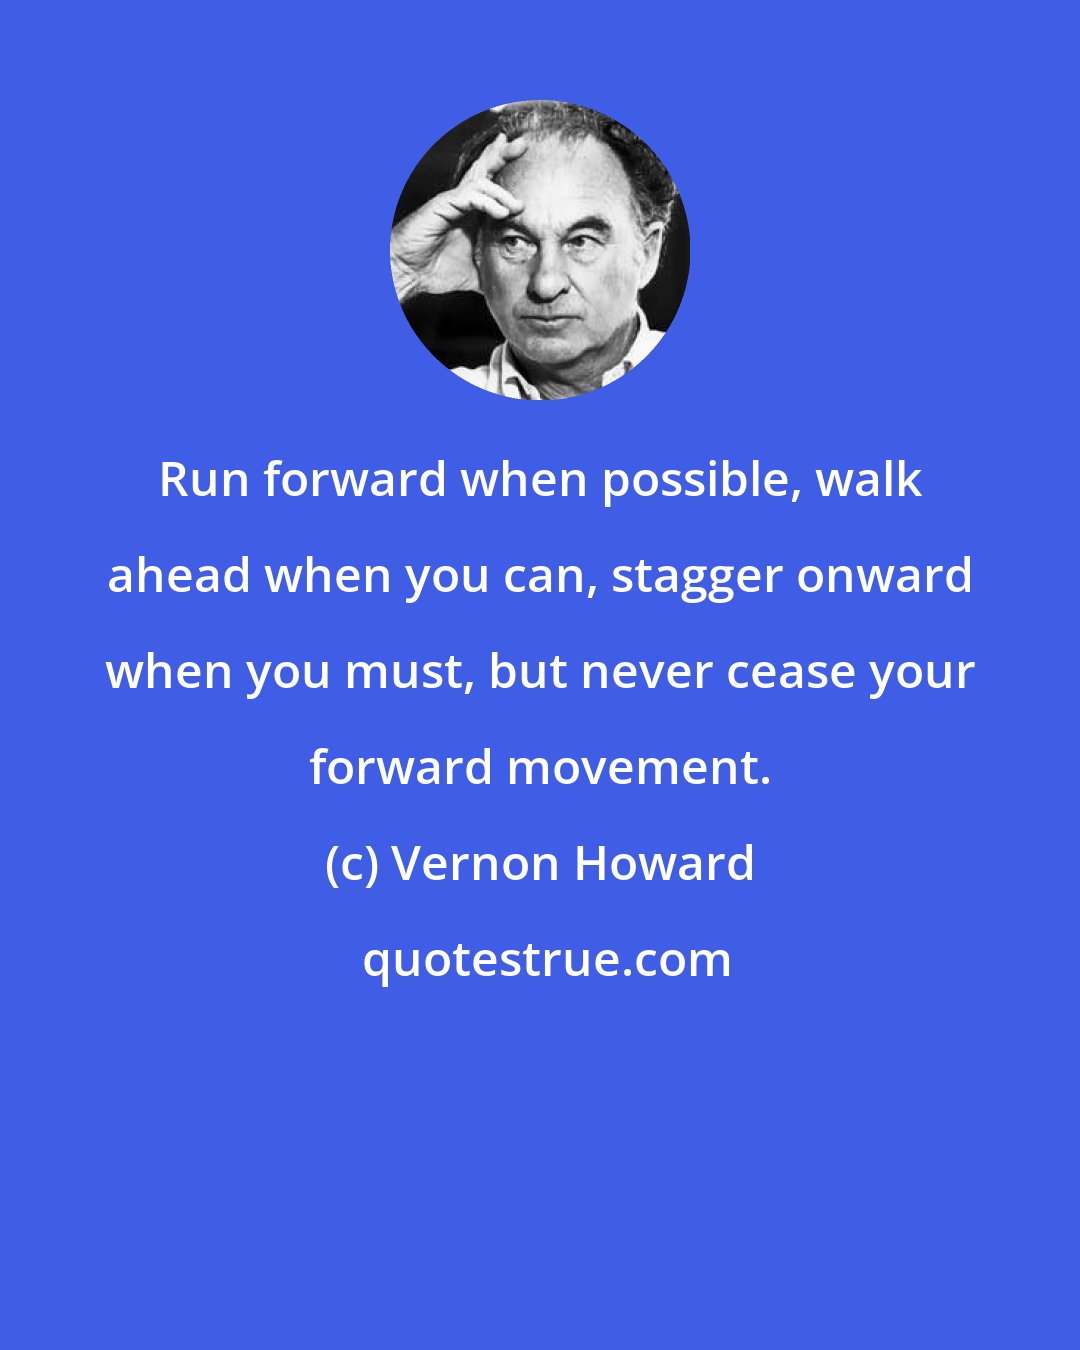 Vernon Howard: Run forward when possible, walk ahead when you can, stagger onward when you must, but never cease your forward movement.